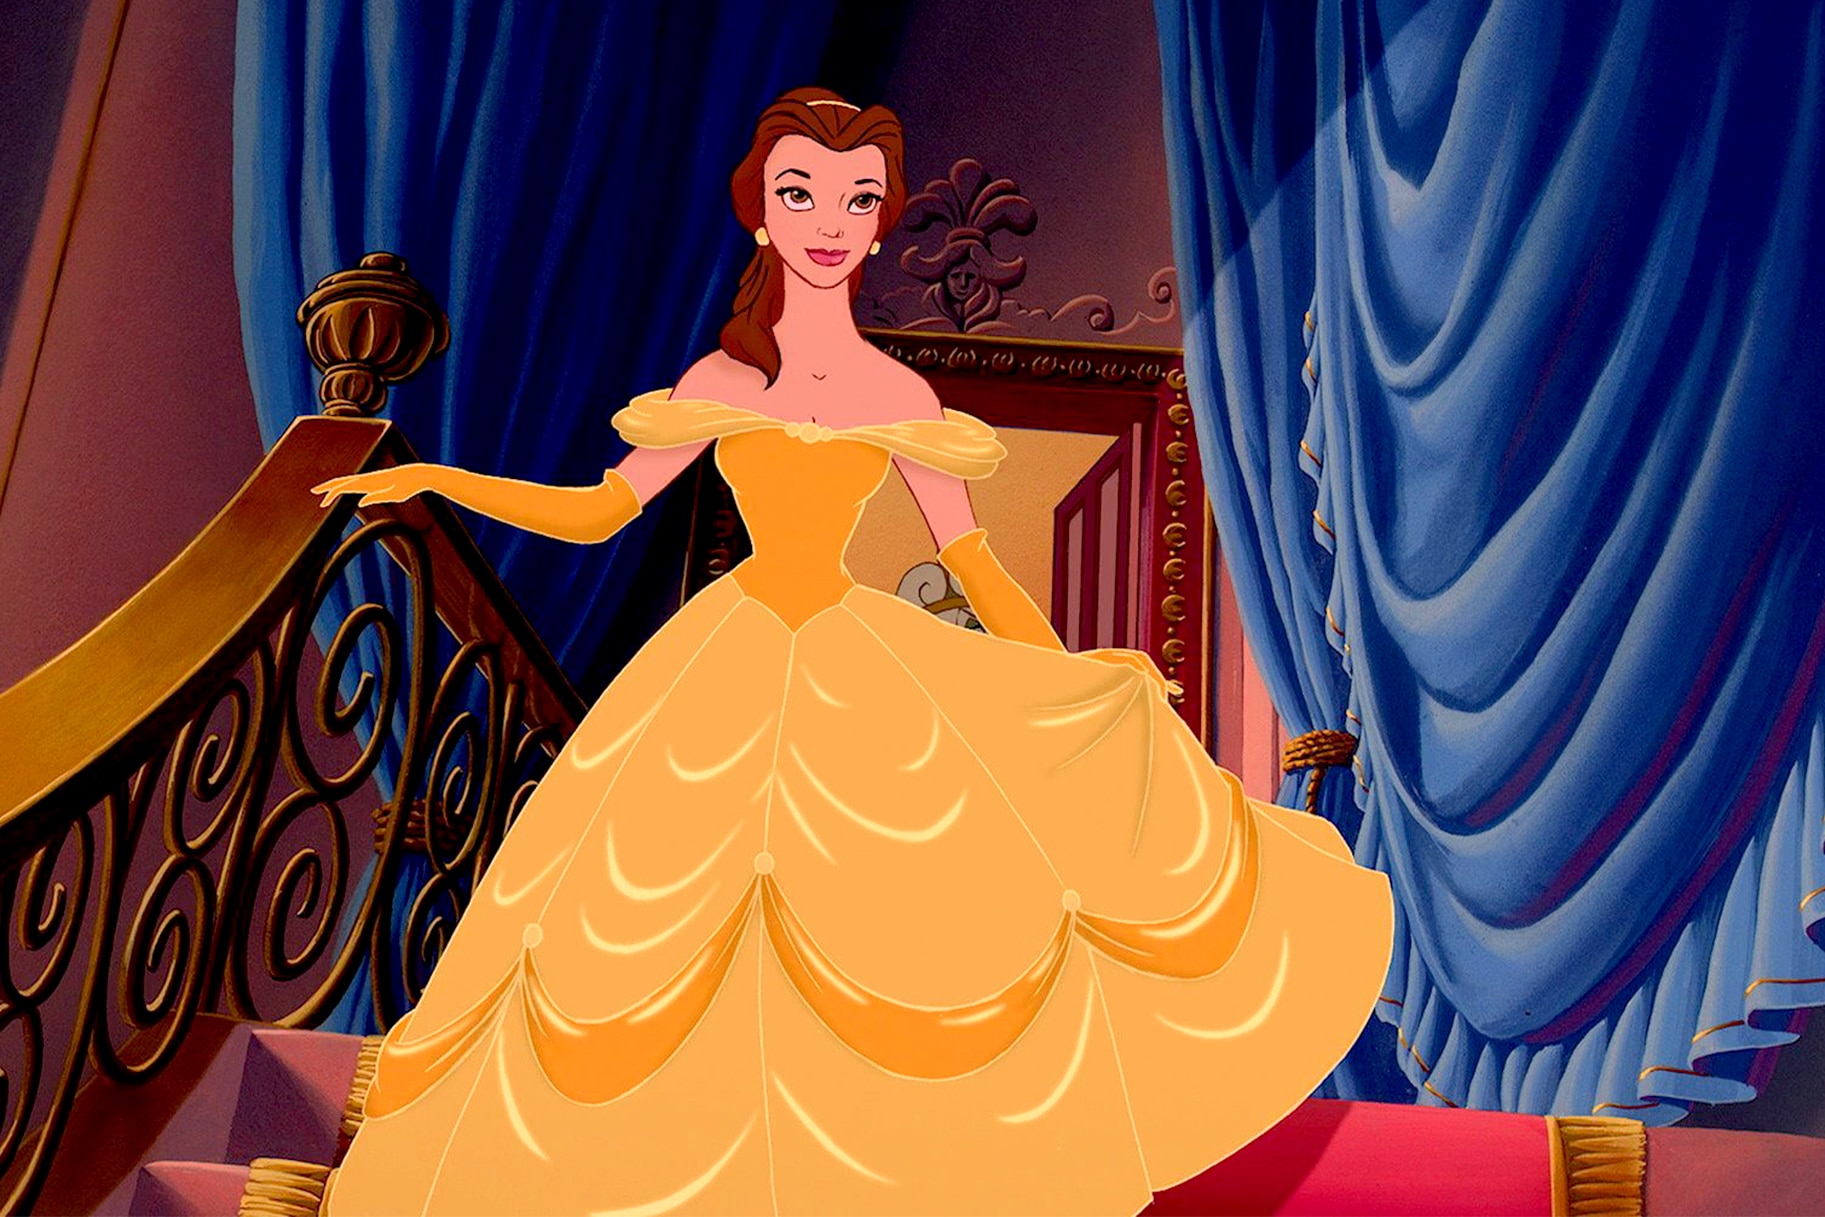 Preview The Yellow Dress From the Live Action Beauty and the Beast